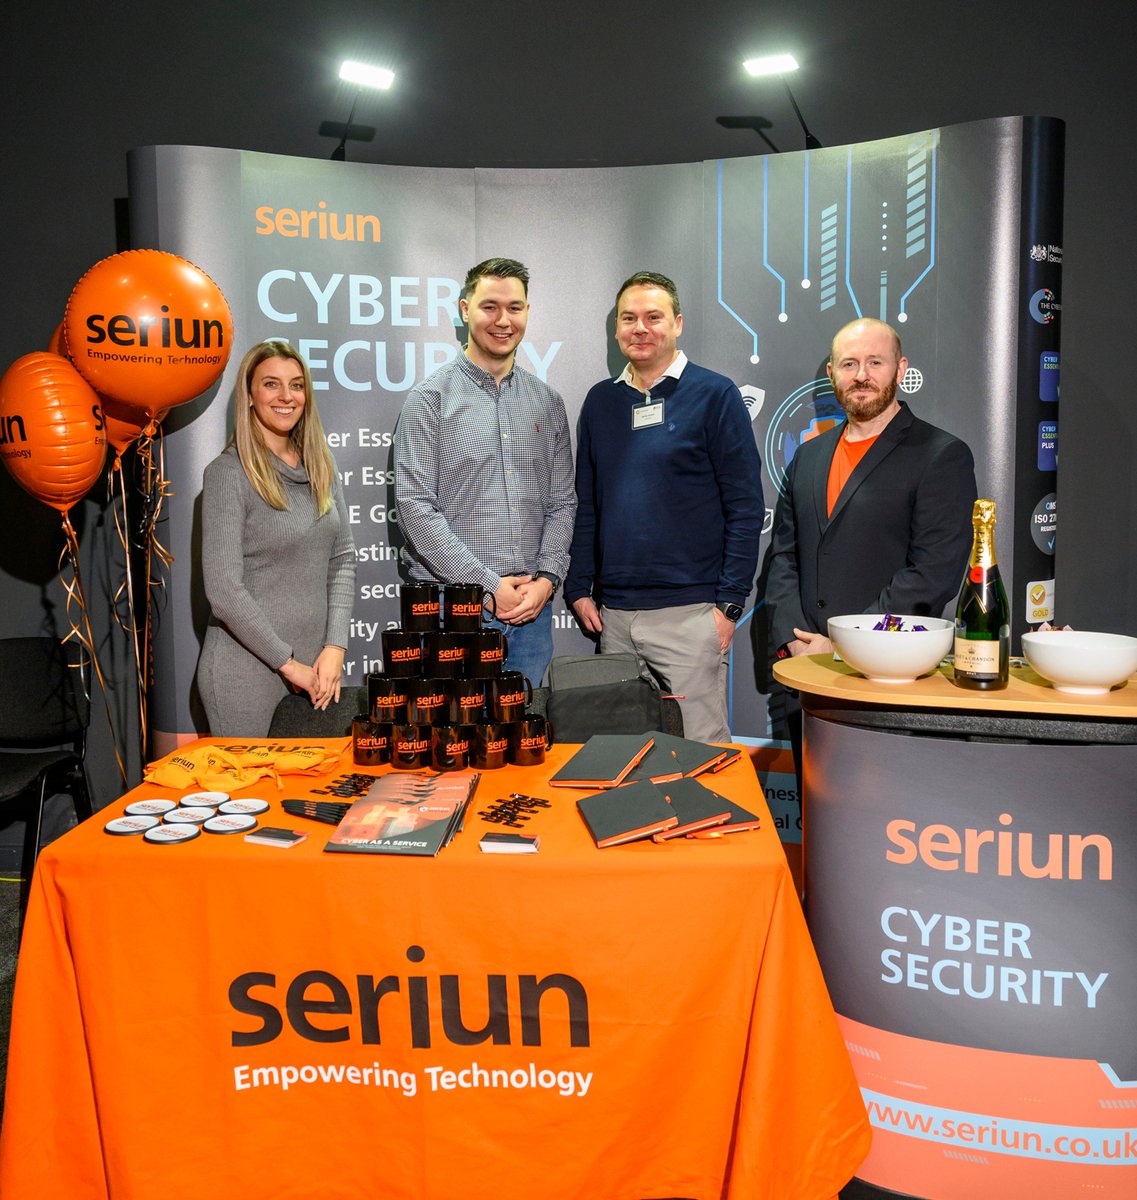 Tuesday shout-out to the @seriun team who joined us at #LLE23 💙 Seriun has provided top class IT Support, Telecoms & Software solutions to companies across the NW since 2003 - and Wayne presented a super seminar on Cyberhacking Prevention for us too. 📸 @lizhensonphoto